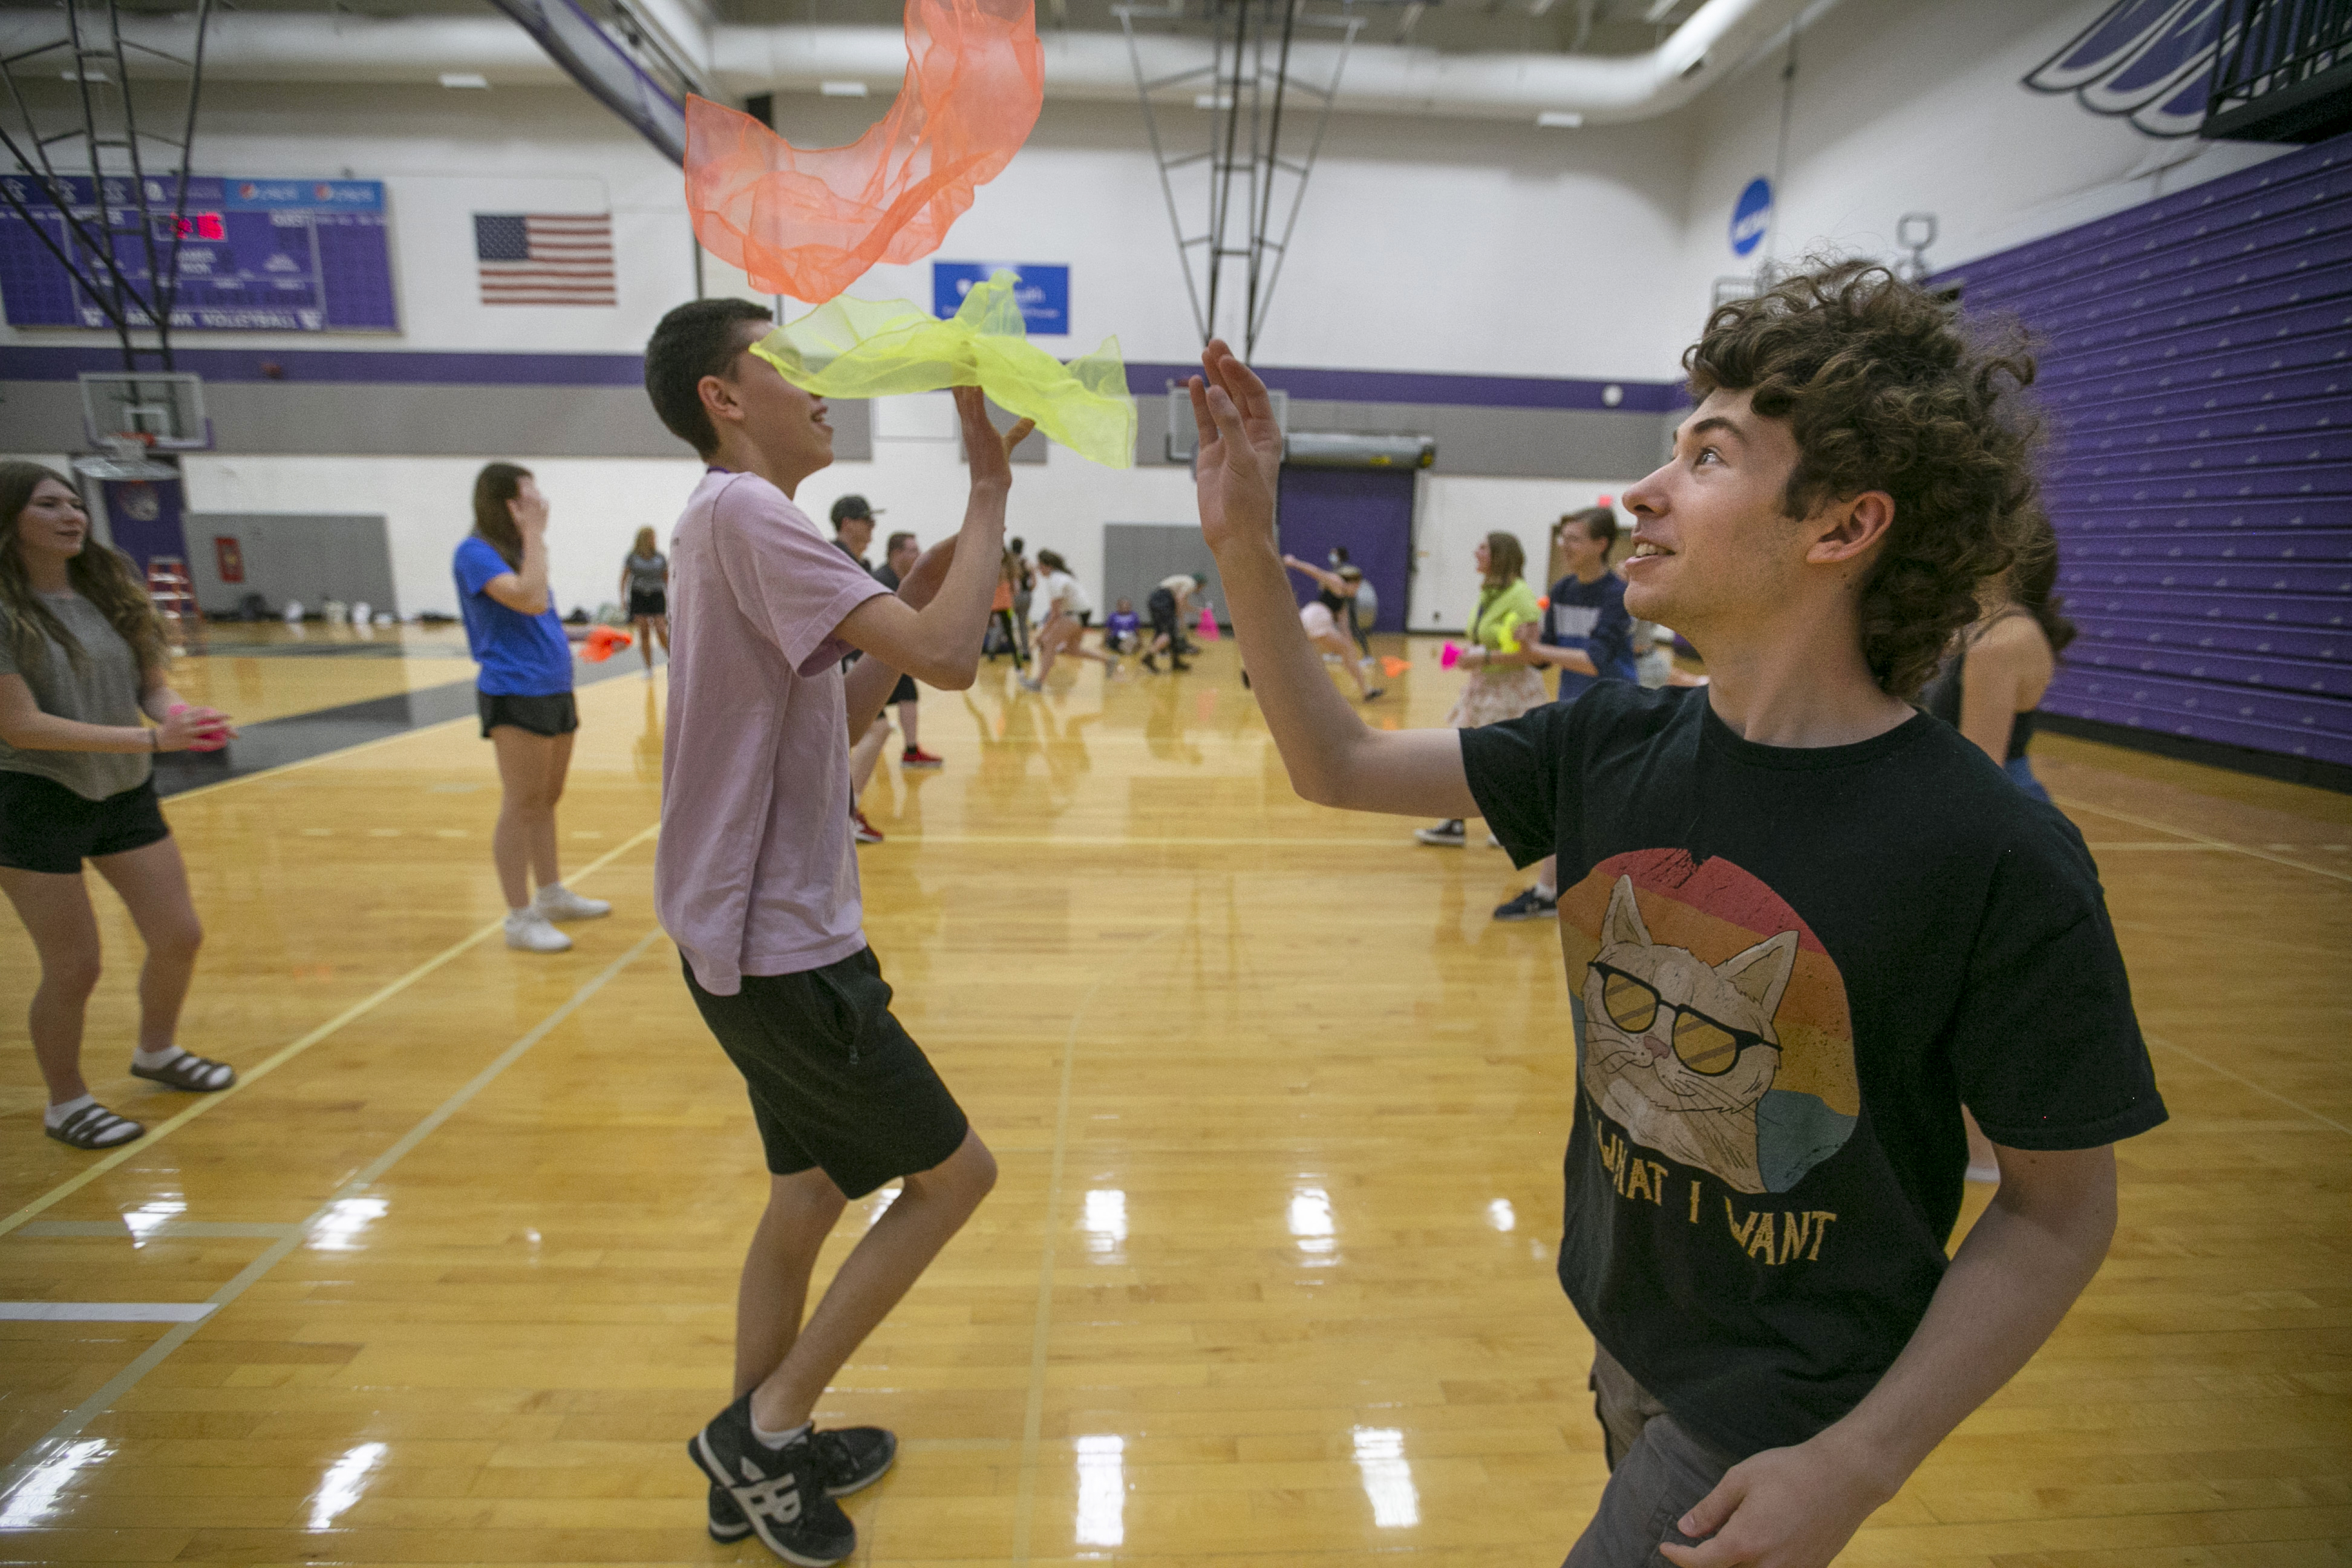 Students play in a gym.